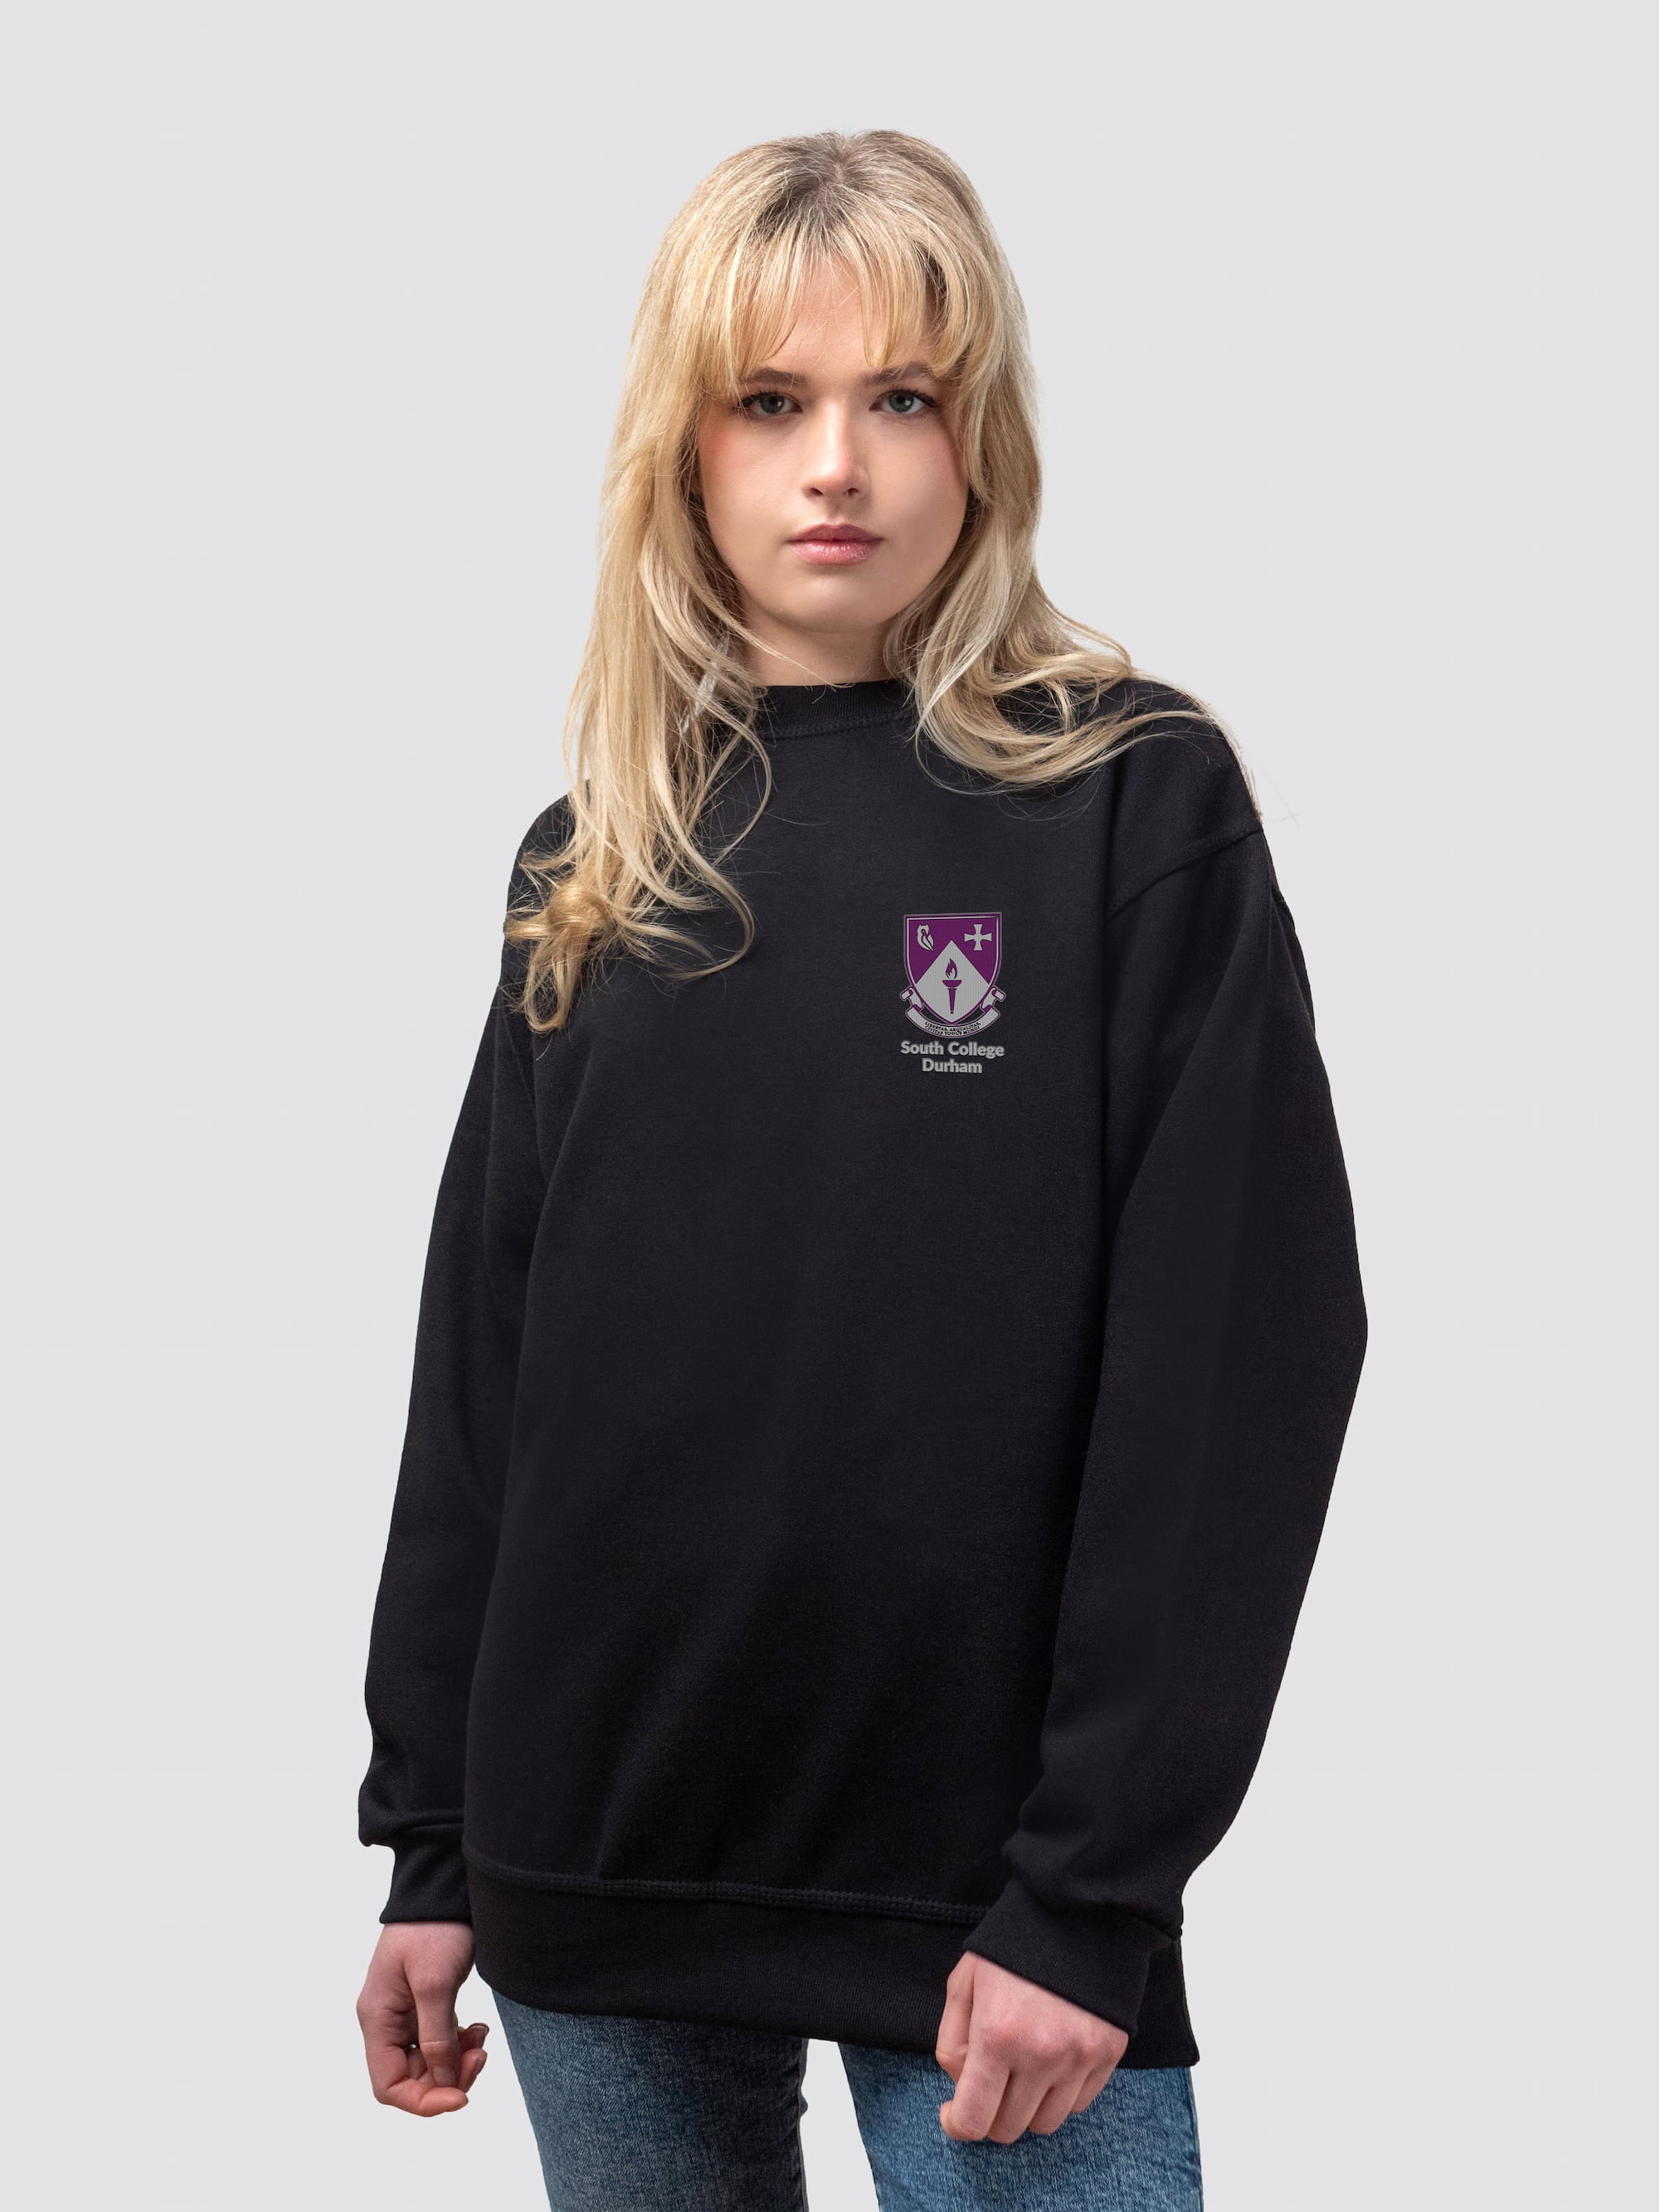 South crest on the front of a black, crew-neck sweatshirt